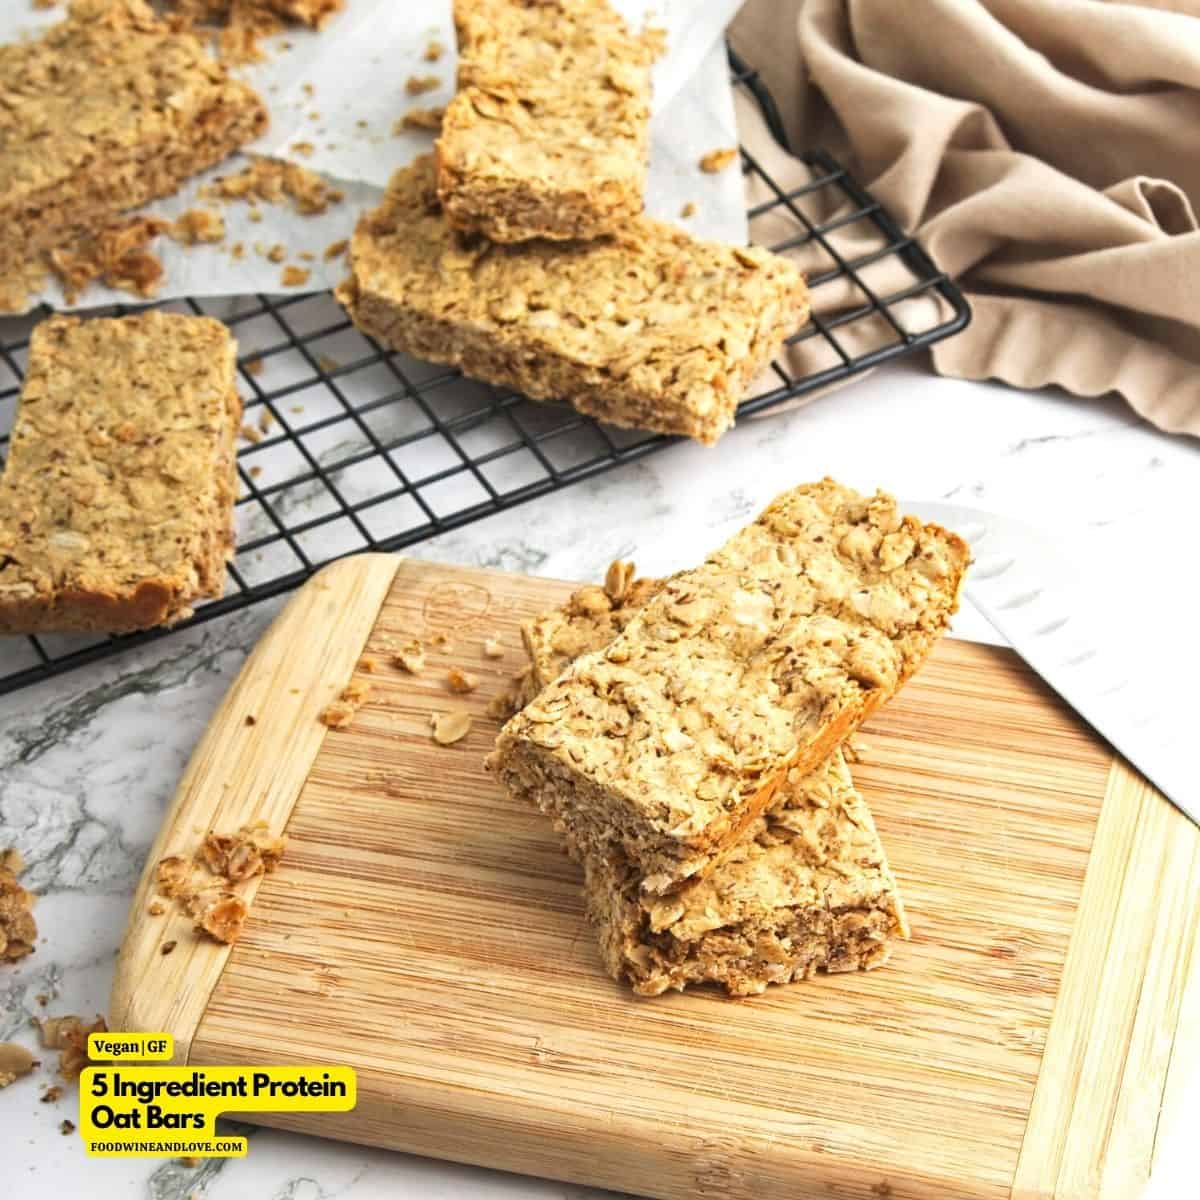 5 Ingredient Protein Oat Bars, a simple and nutritious snack made with healthy ingredients and sweetened with maple syrup.